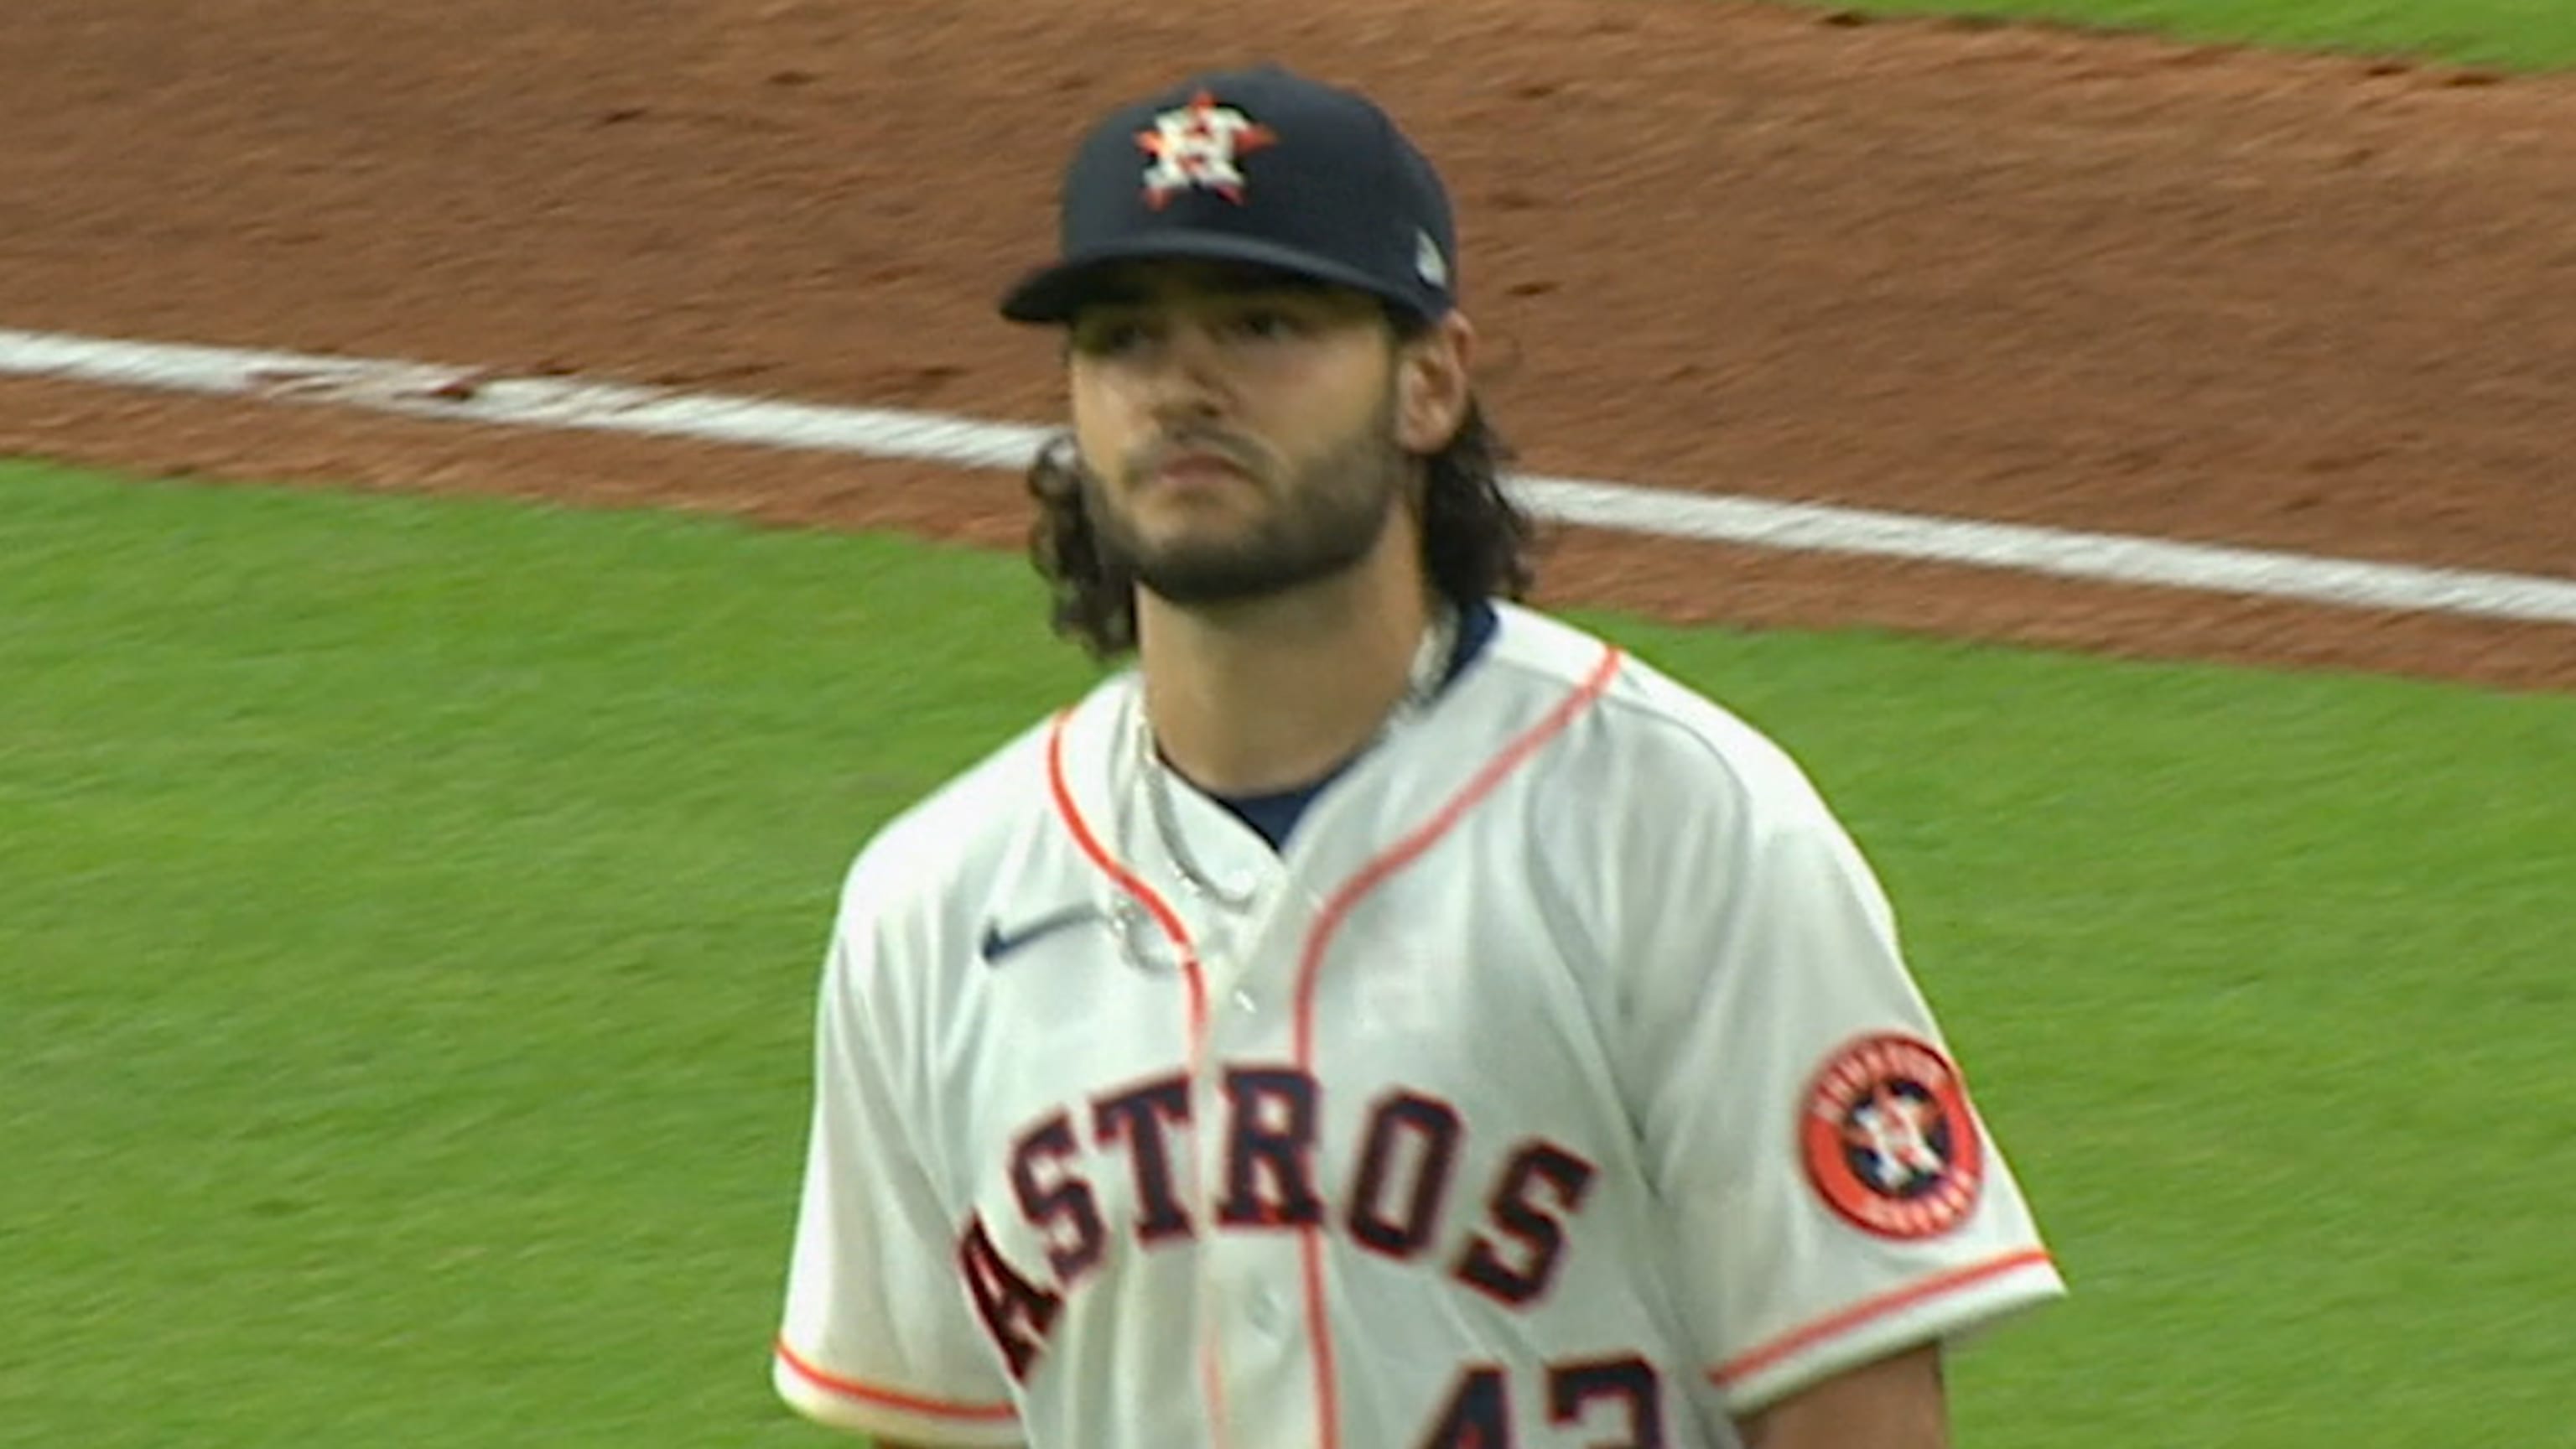 Space City Home Network on X: Lance McCullers Jr tonight vs Atlanta 5.0 IP  / 7 H / 3 R / 3 BB / 6 K / 91 PITCHES (54 STRIKES)   / X